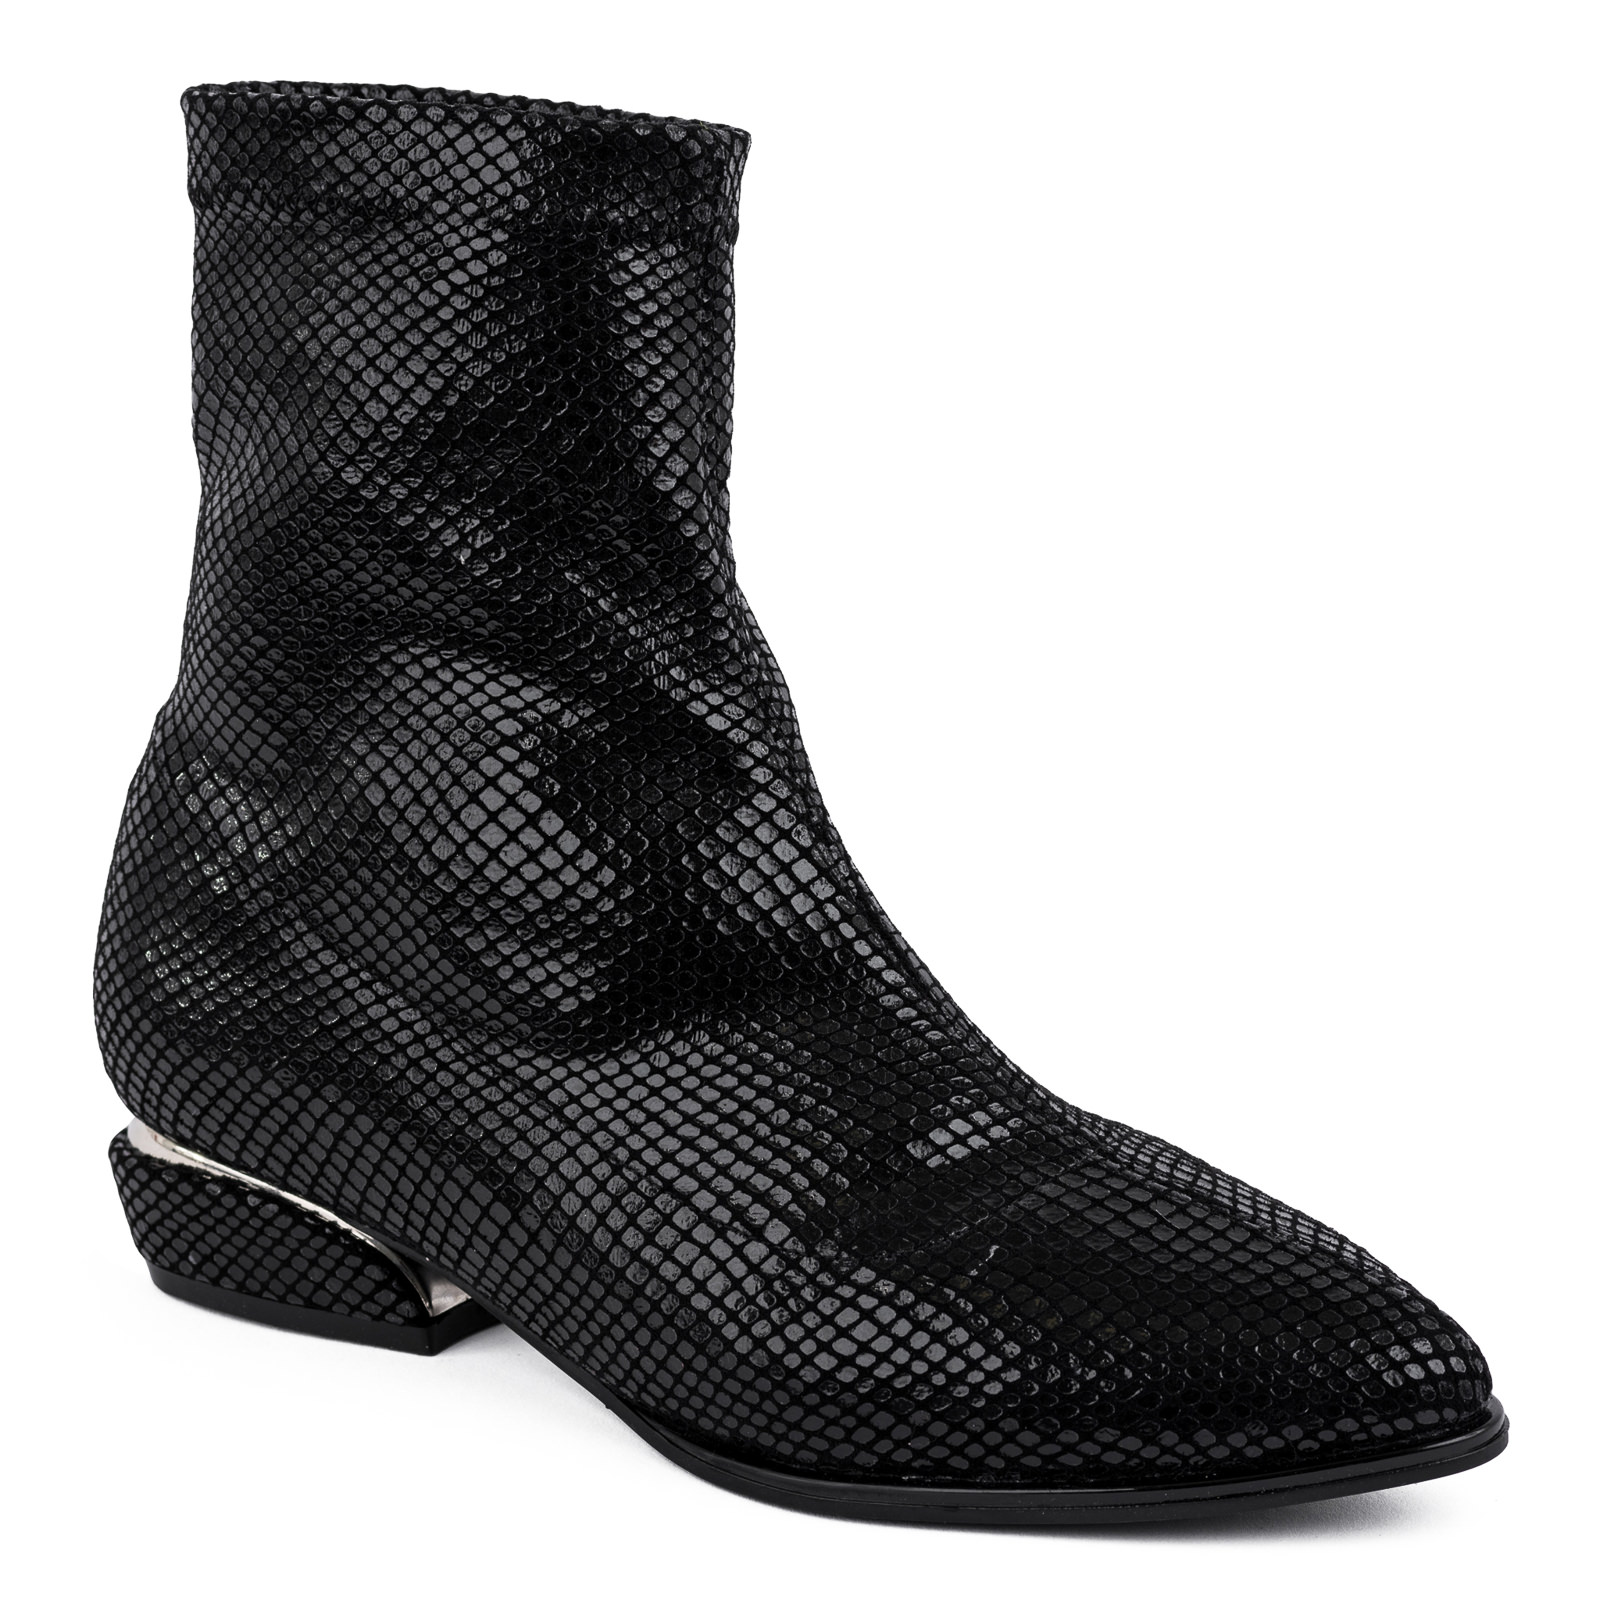 CROC POINTED PULL ON ANKLE BOOTS - BLACK